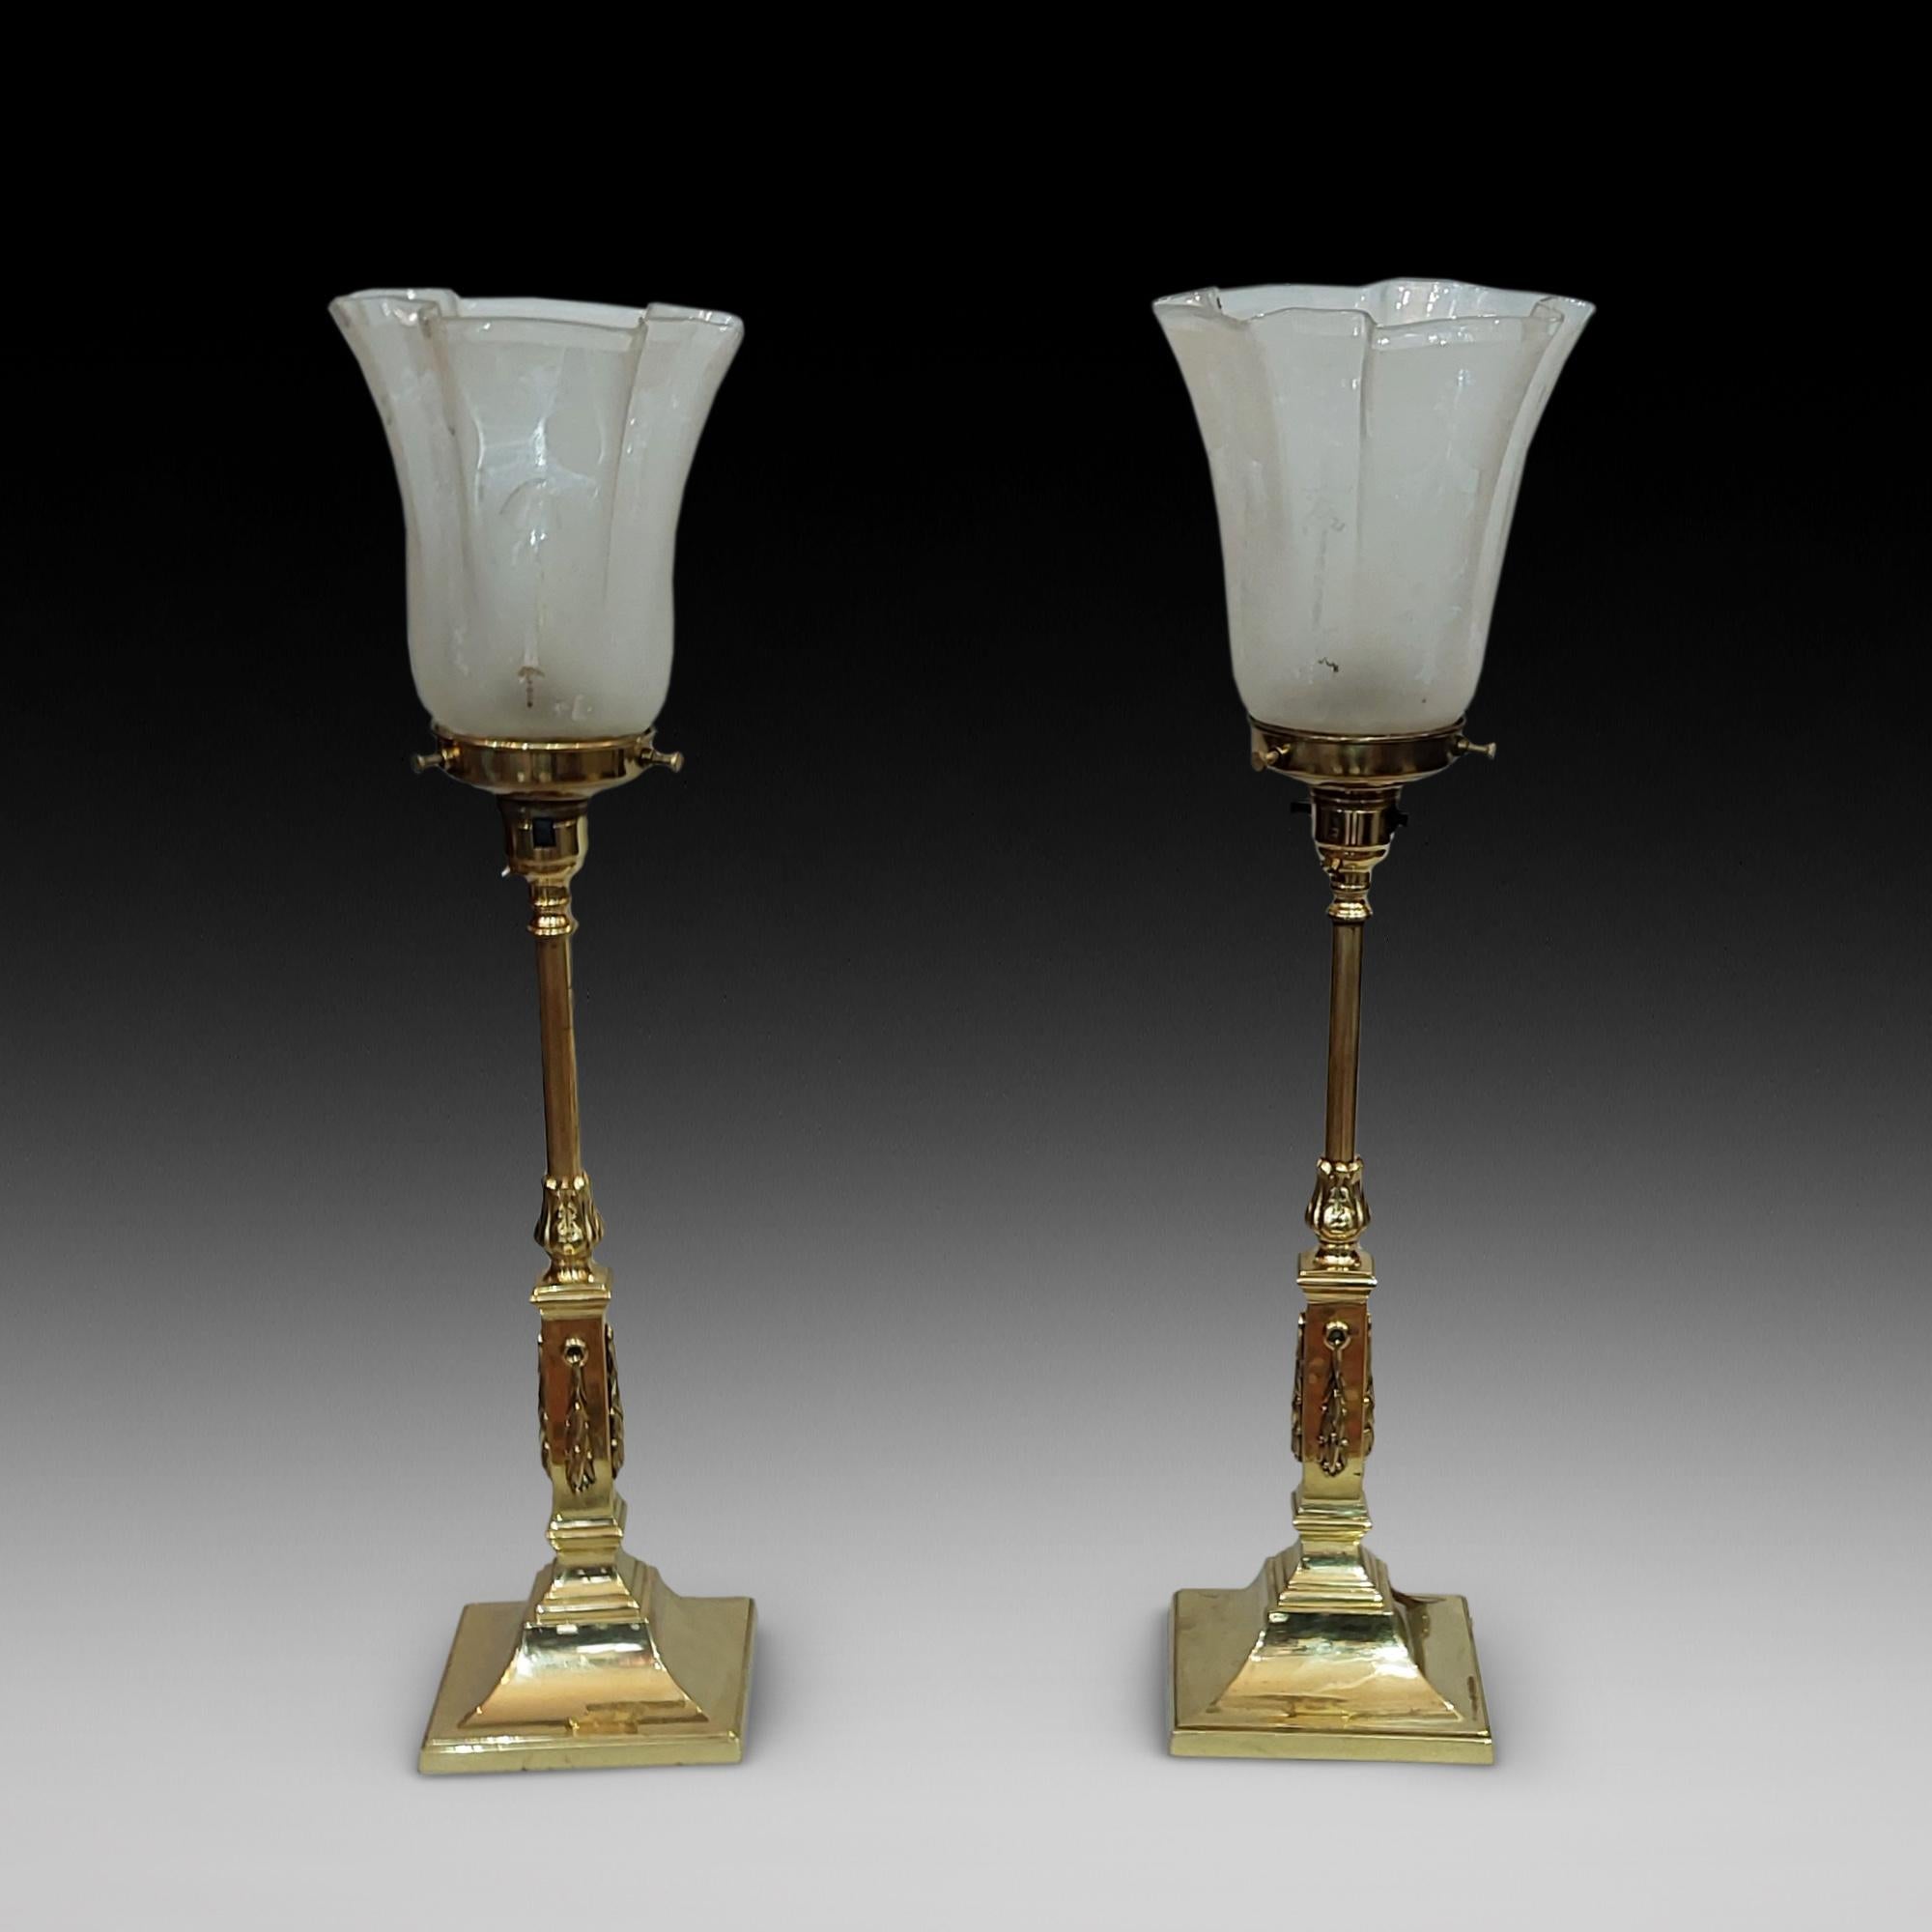 Adam Style Pair of Edwardian Adam Revival Brass Table Lamps